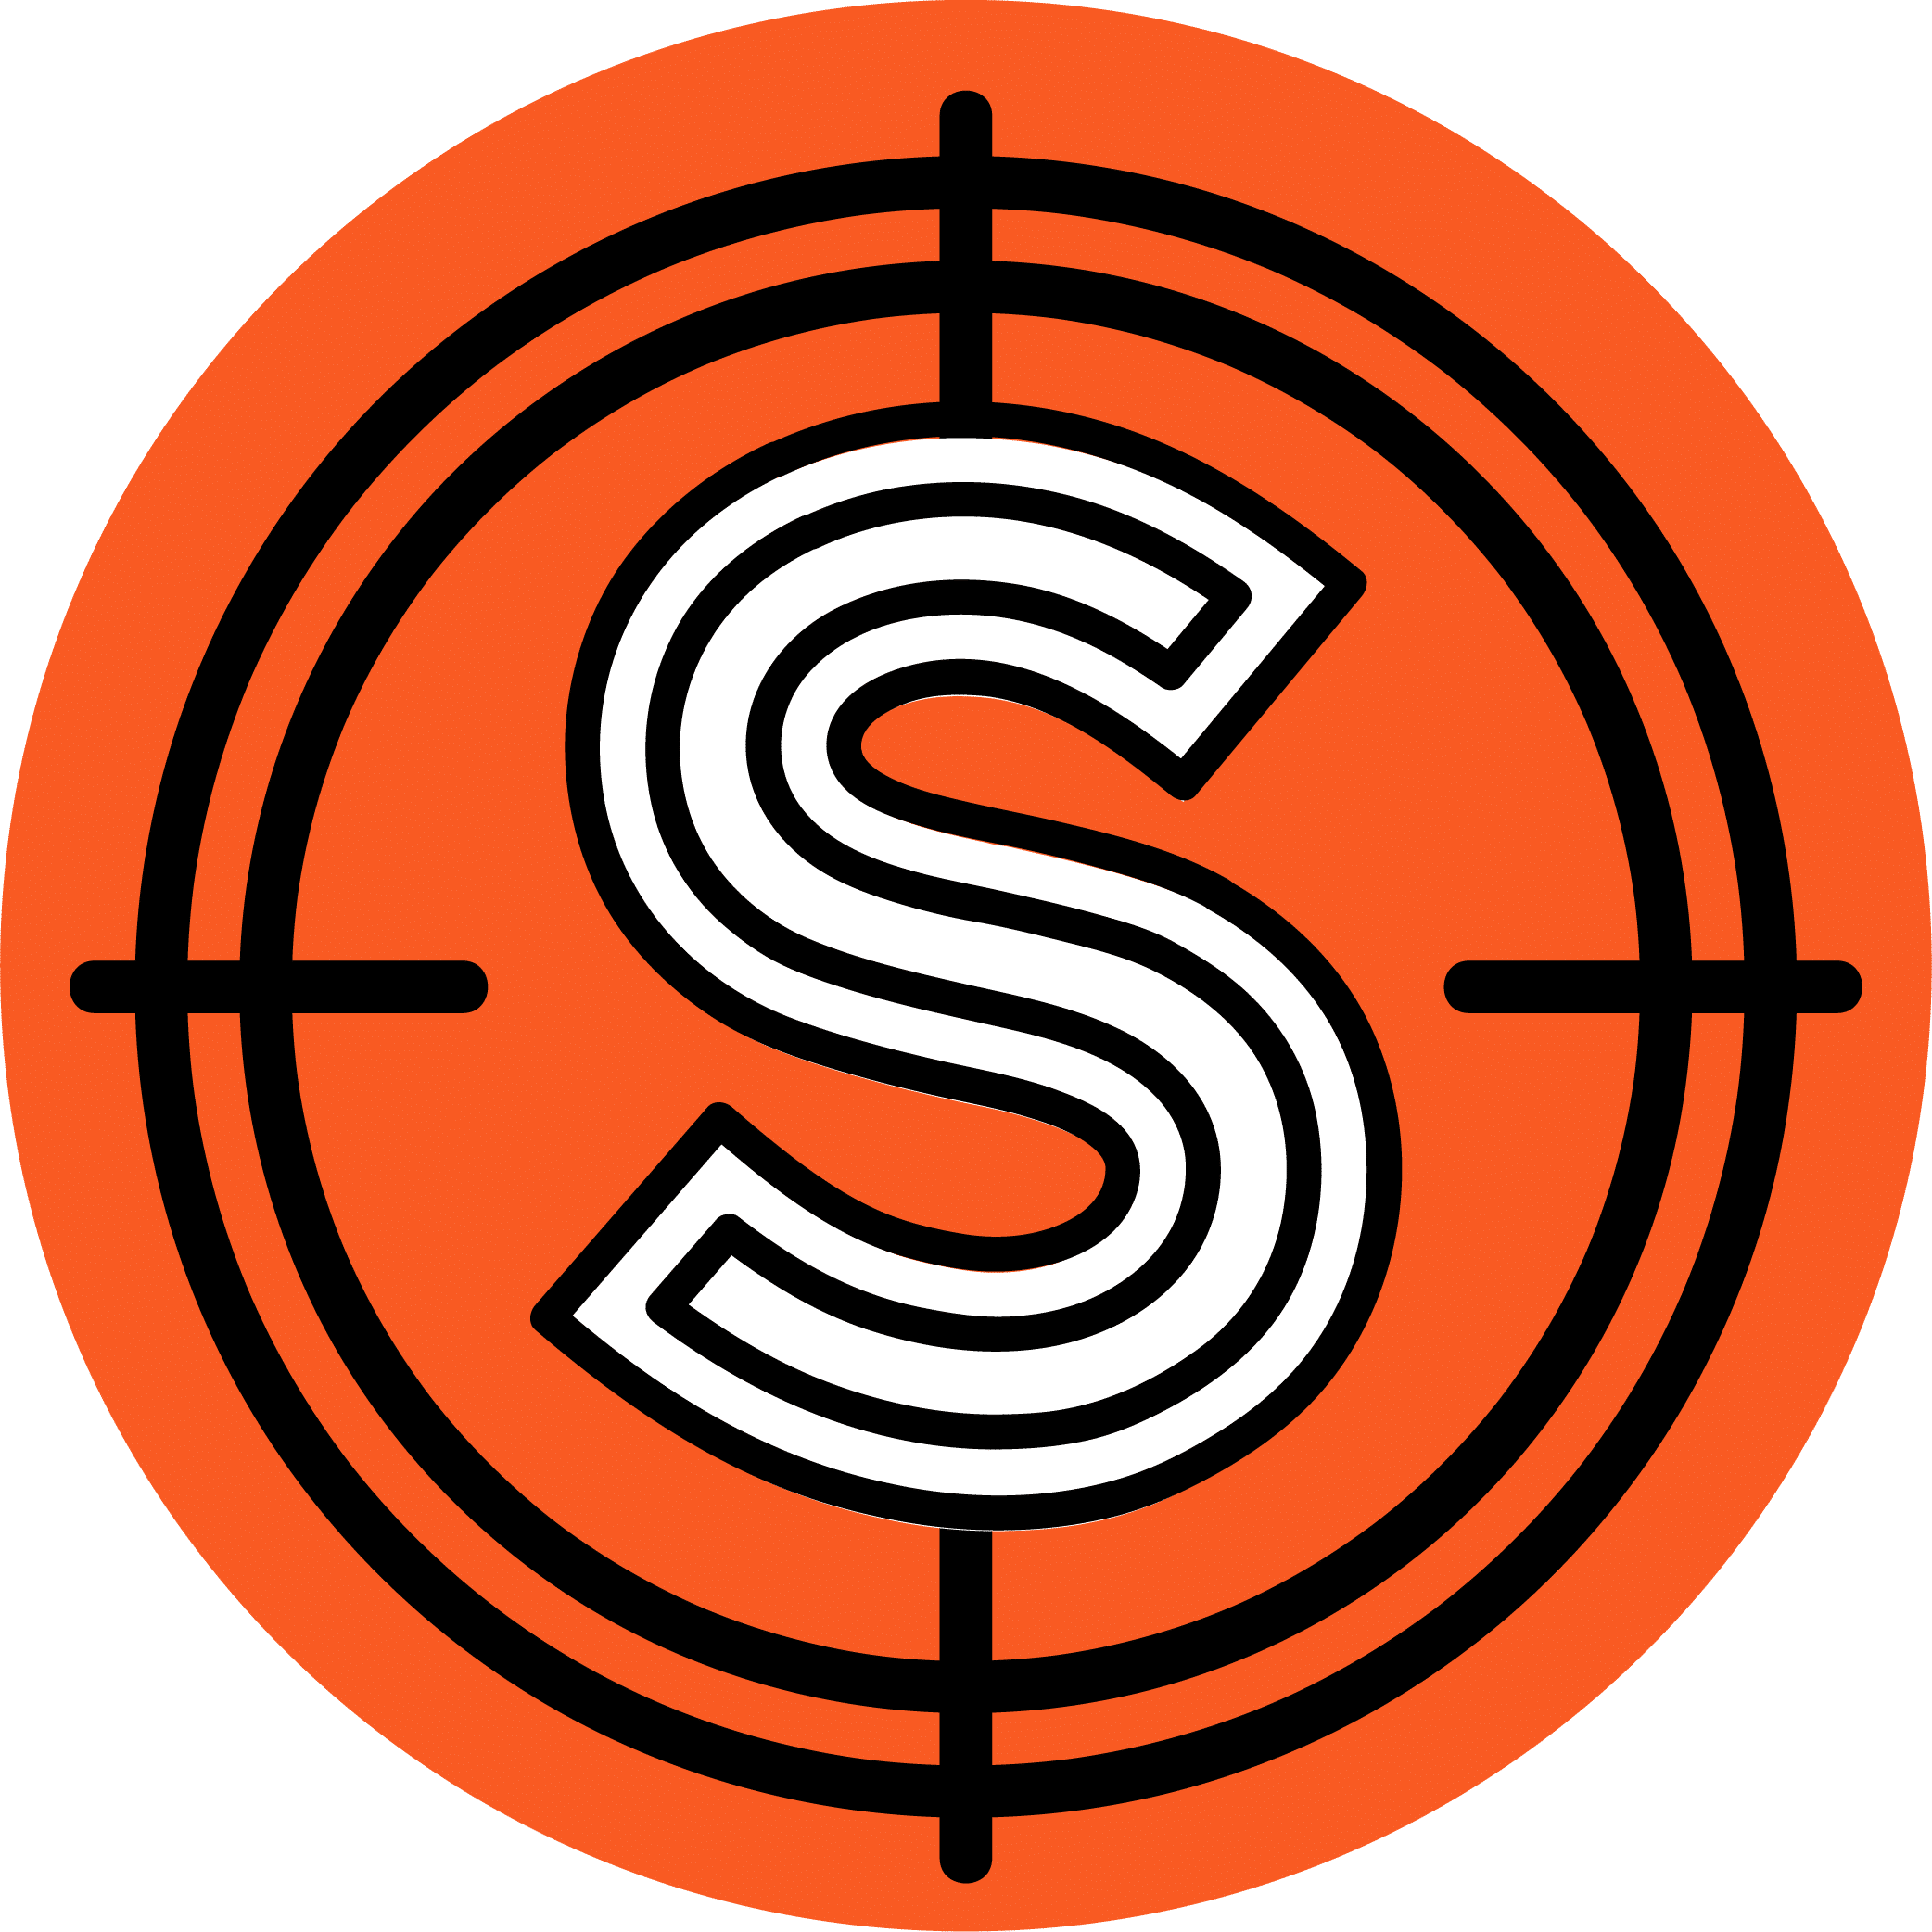 Illustration of an S in crosshairs.